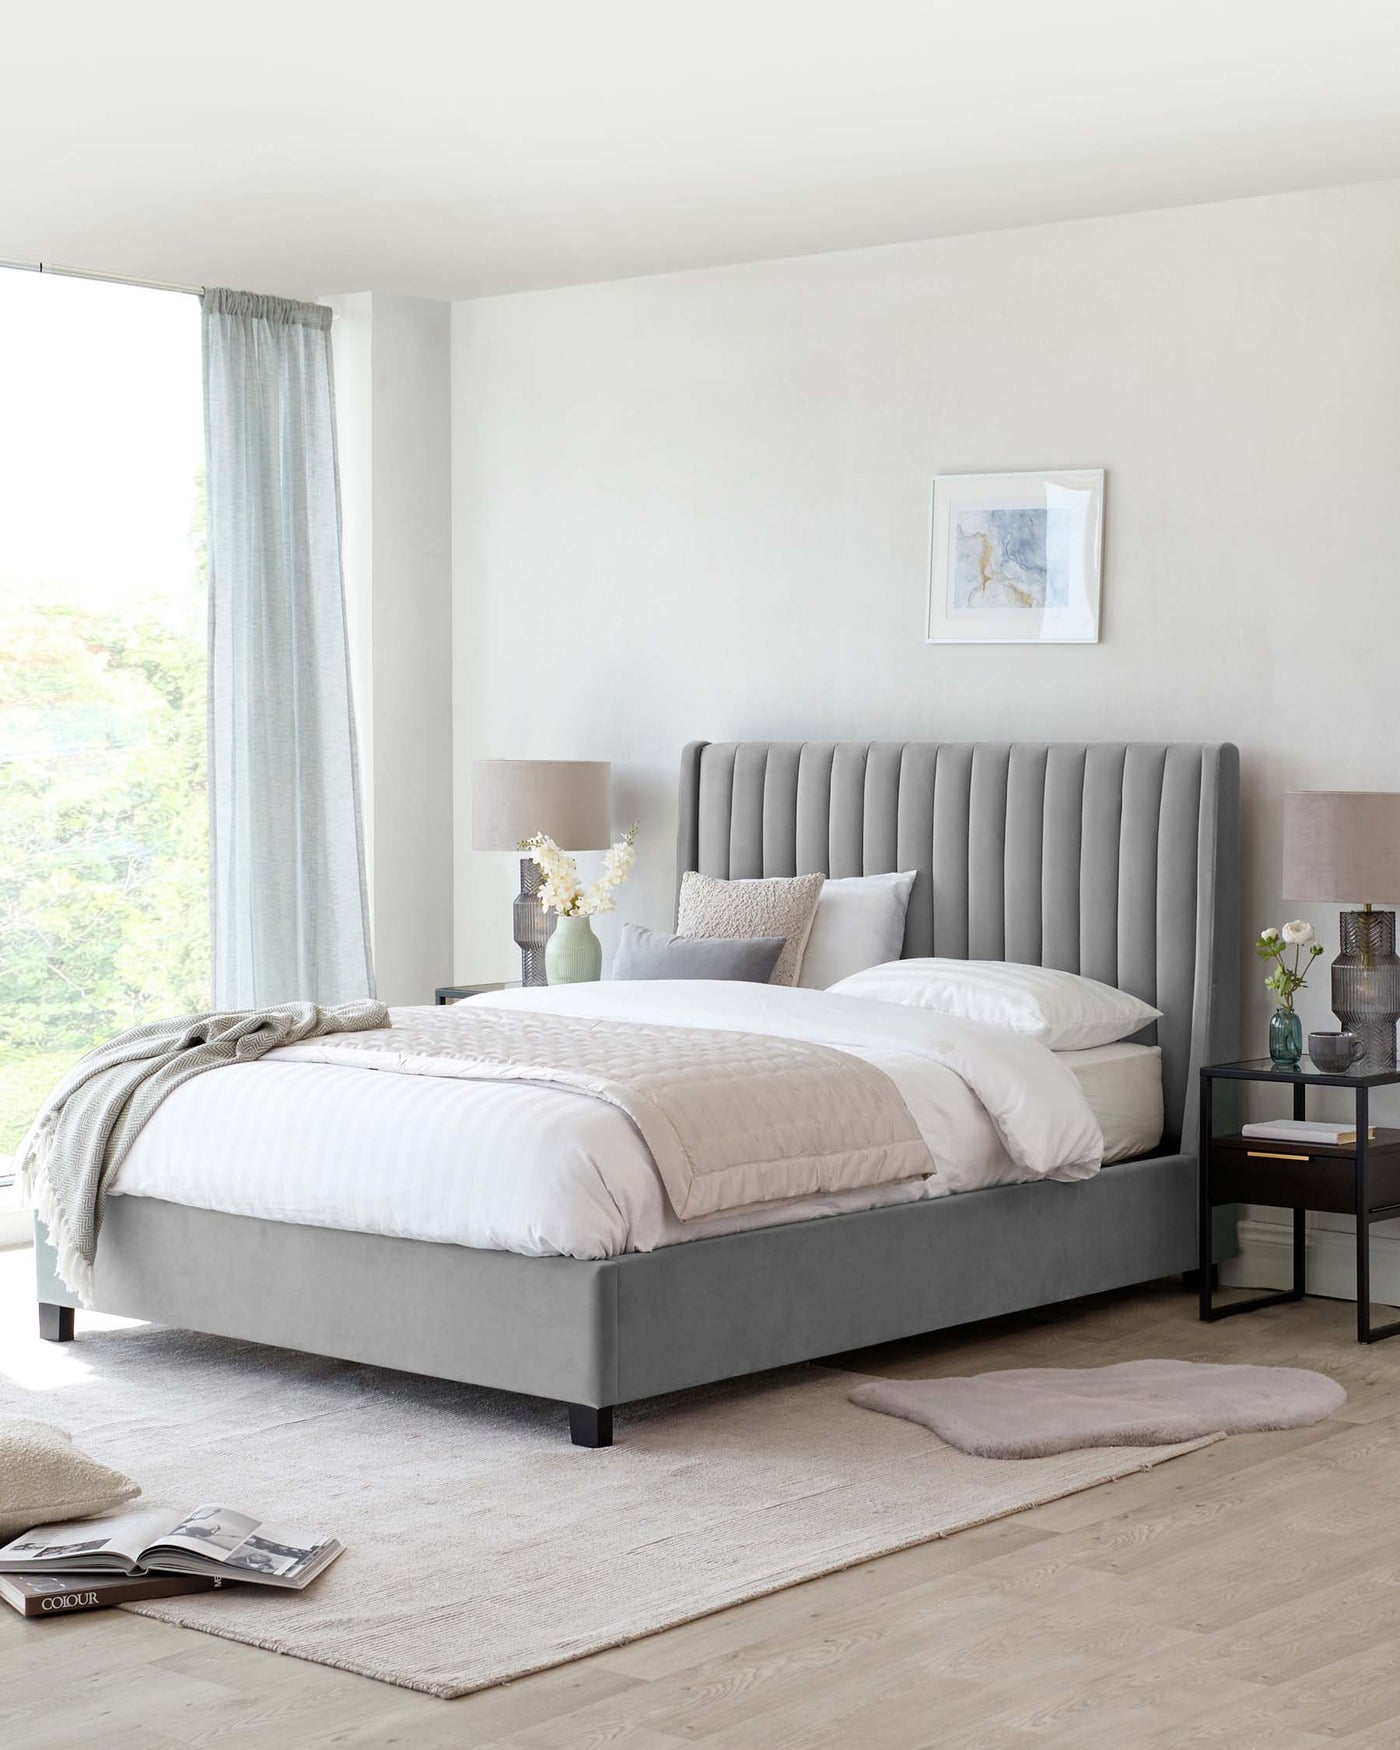 Elegant contemporary bedroom featuring a queen-size bed with a tall, vertically channelled, light grey upholstered headboard and frame on short black legs. The bed is dressed in white bedding and accent pillows and a light grey throw blanket. Beside the bed, a black nightstand with a lamp, decorative flowers, and a picture frame is visible. The room is completed with a soft beige area rug beneath the bed and a small grey accent rug beside it.